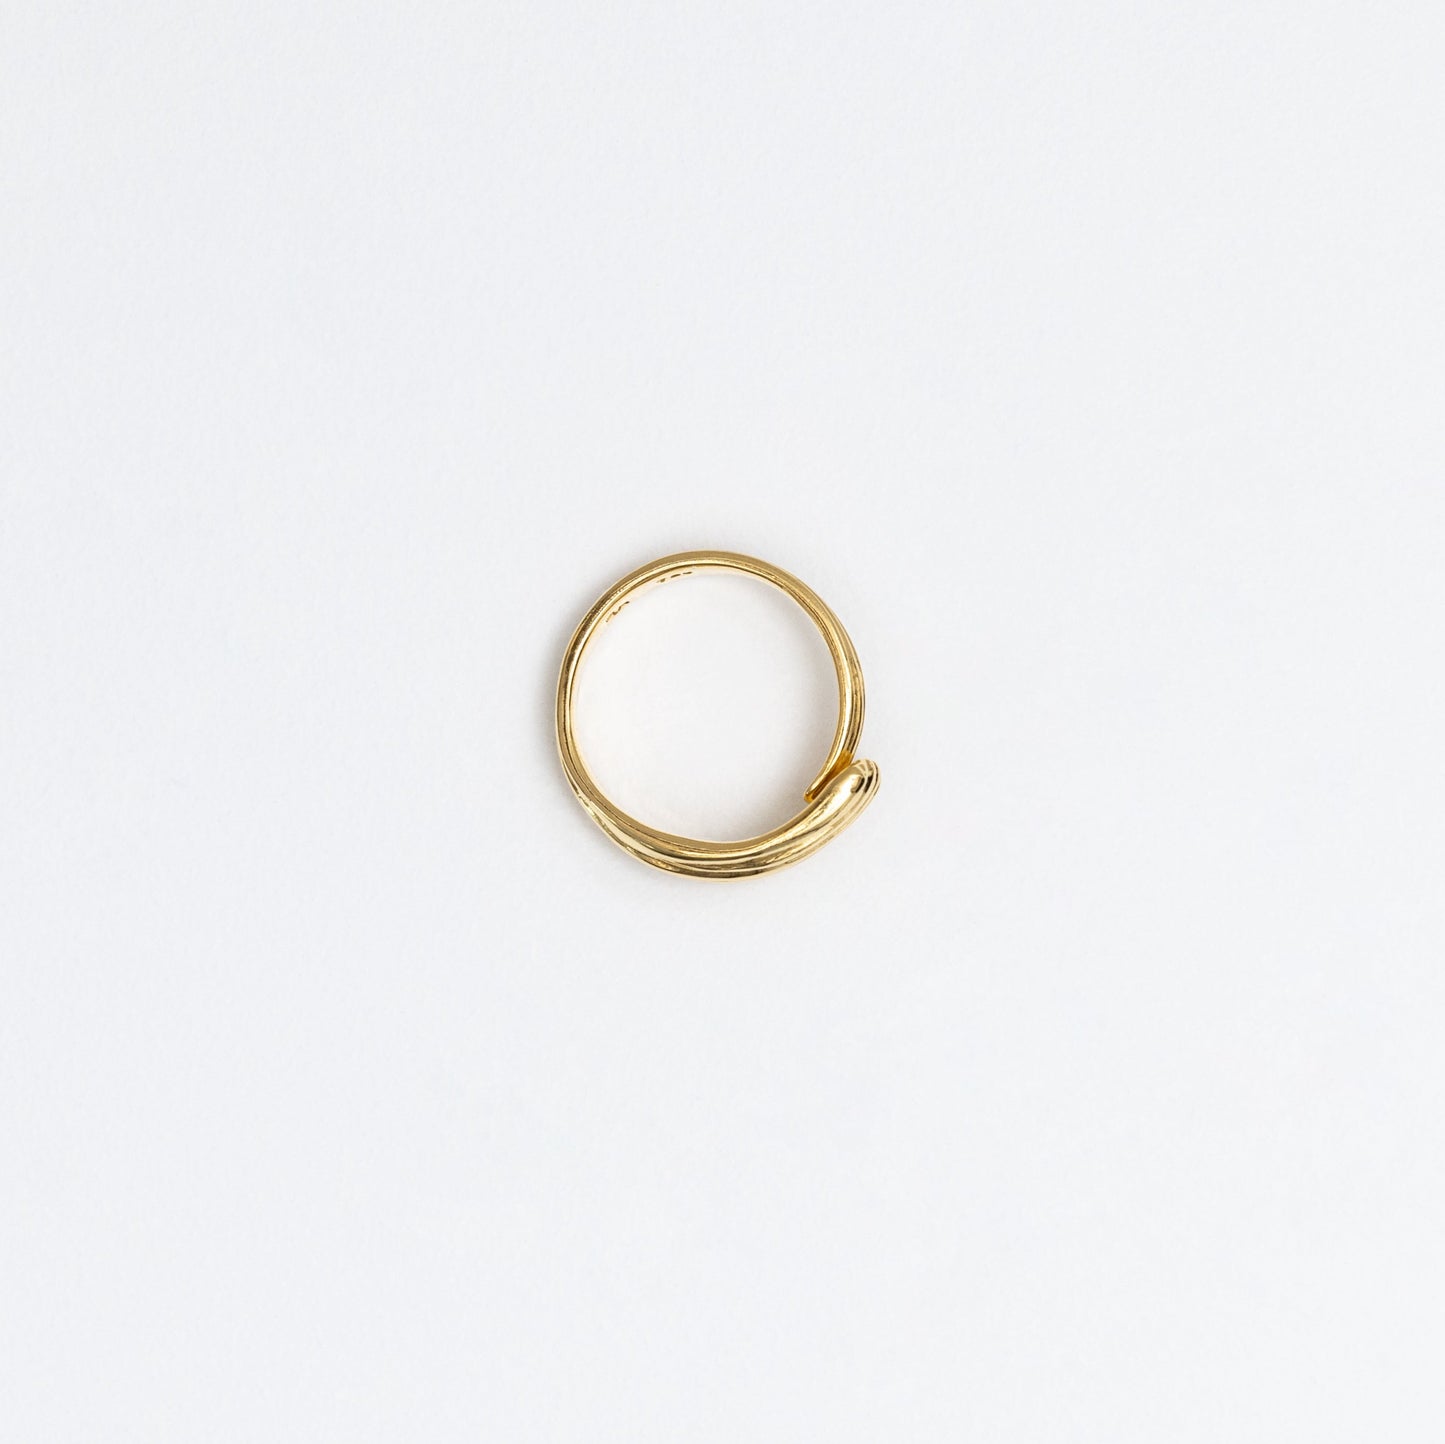 Adjustable gold ring from above